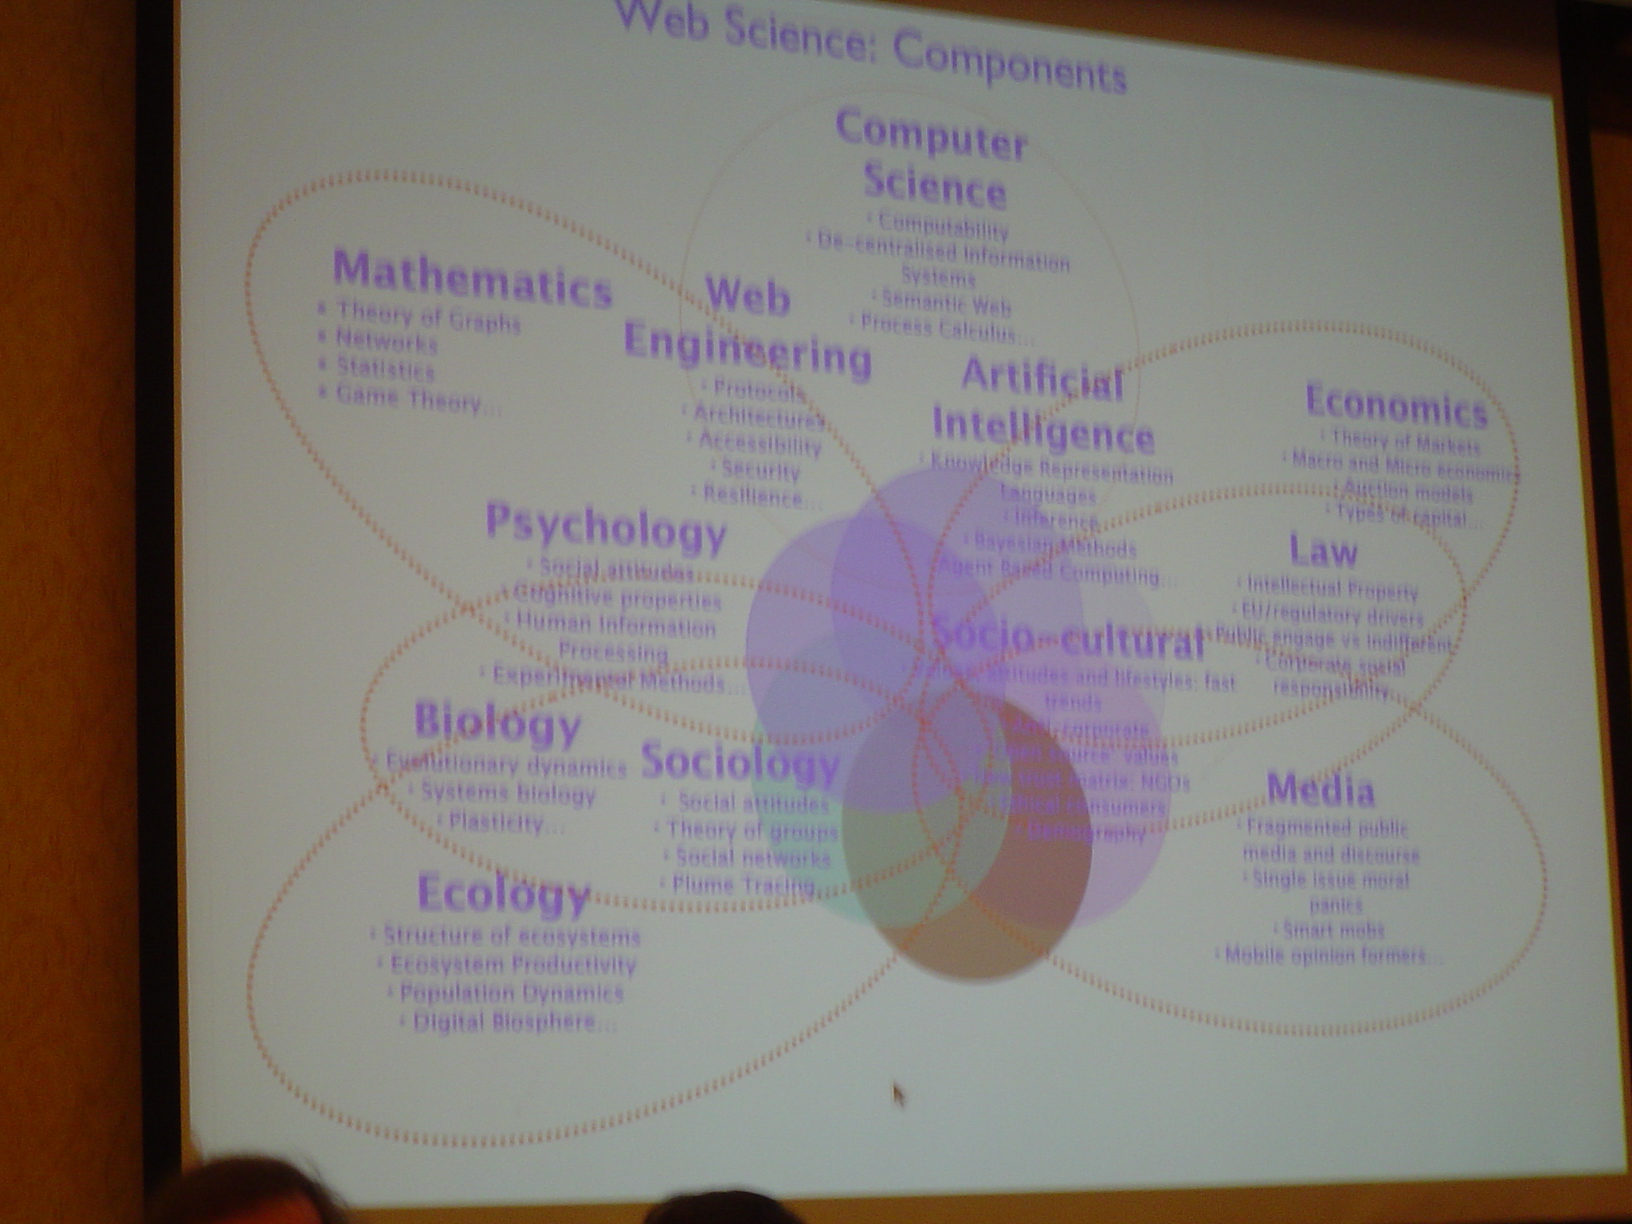 Web Science components